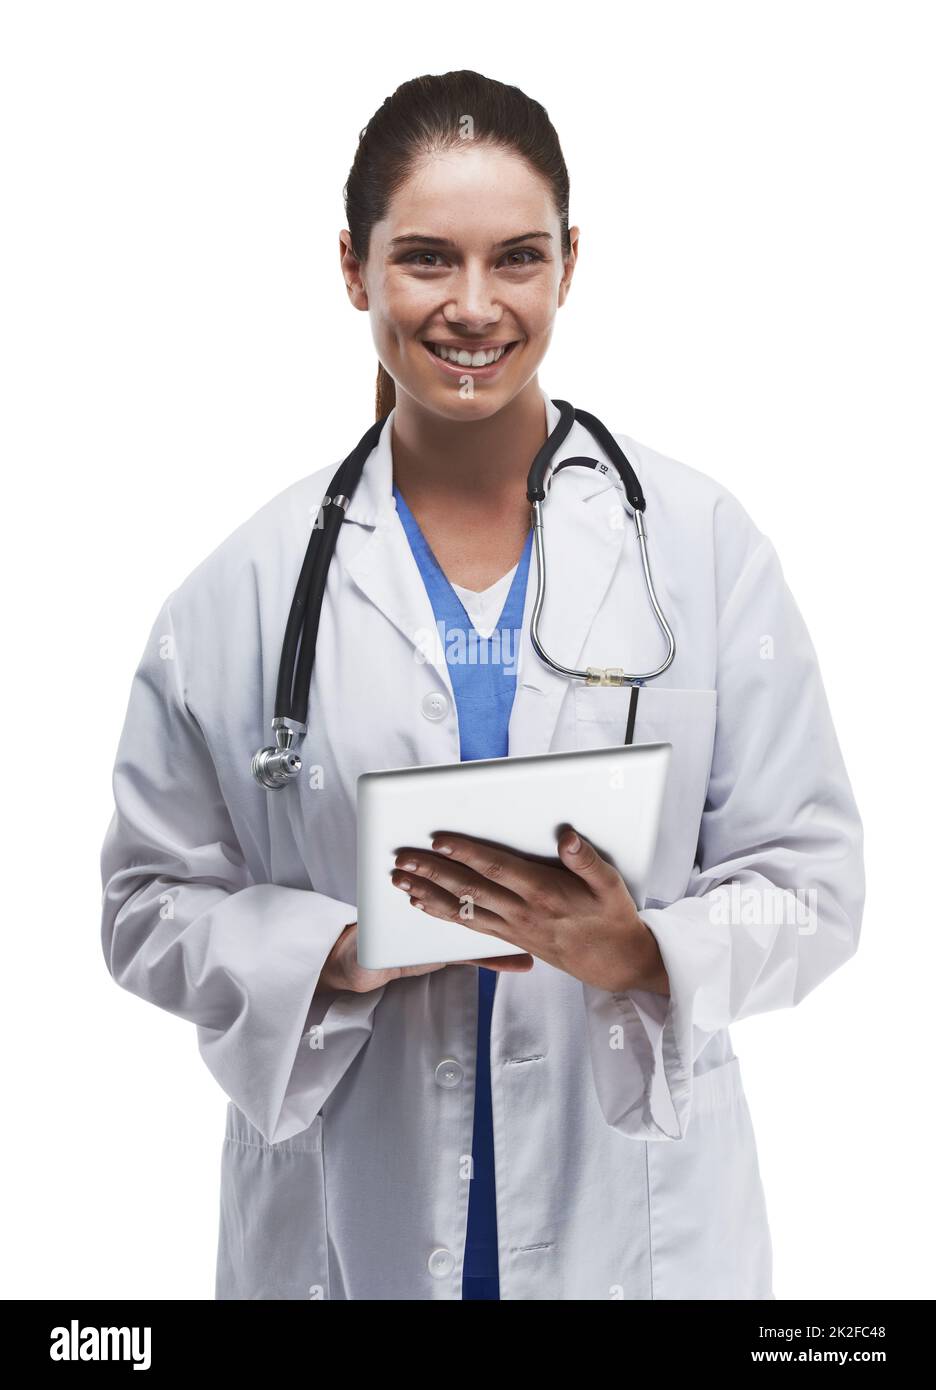 Good health is in her hands. Studio shot of a beautiful young doctor using a digital tablet against a white background. Stock Photo